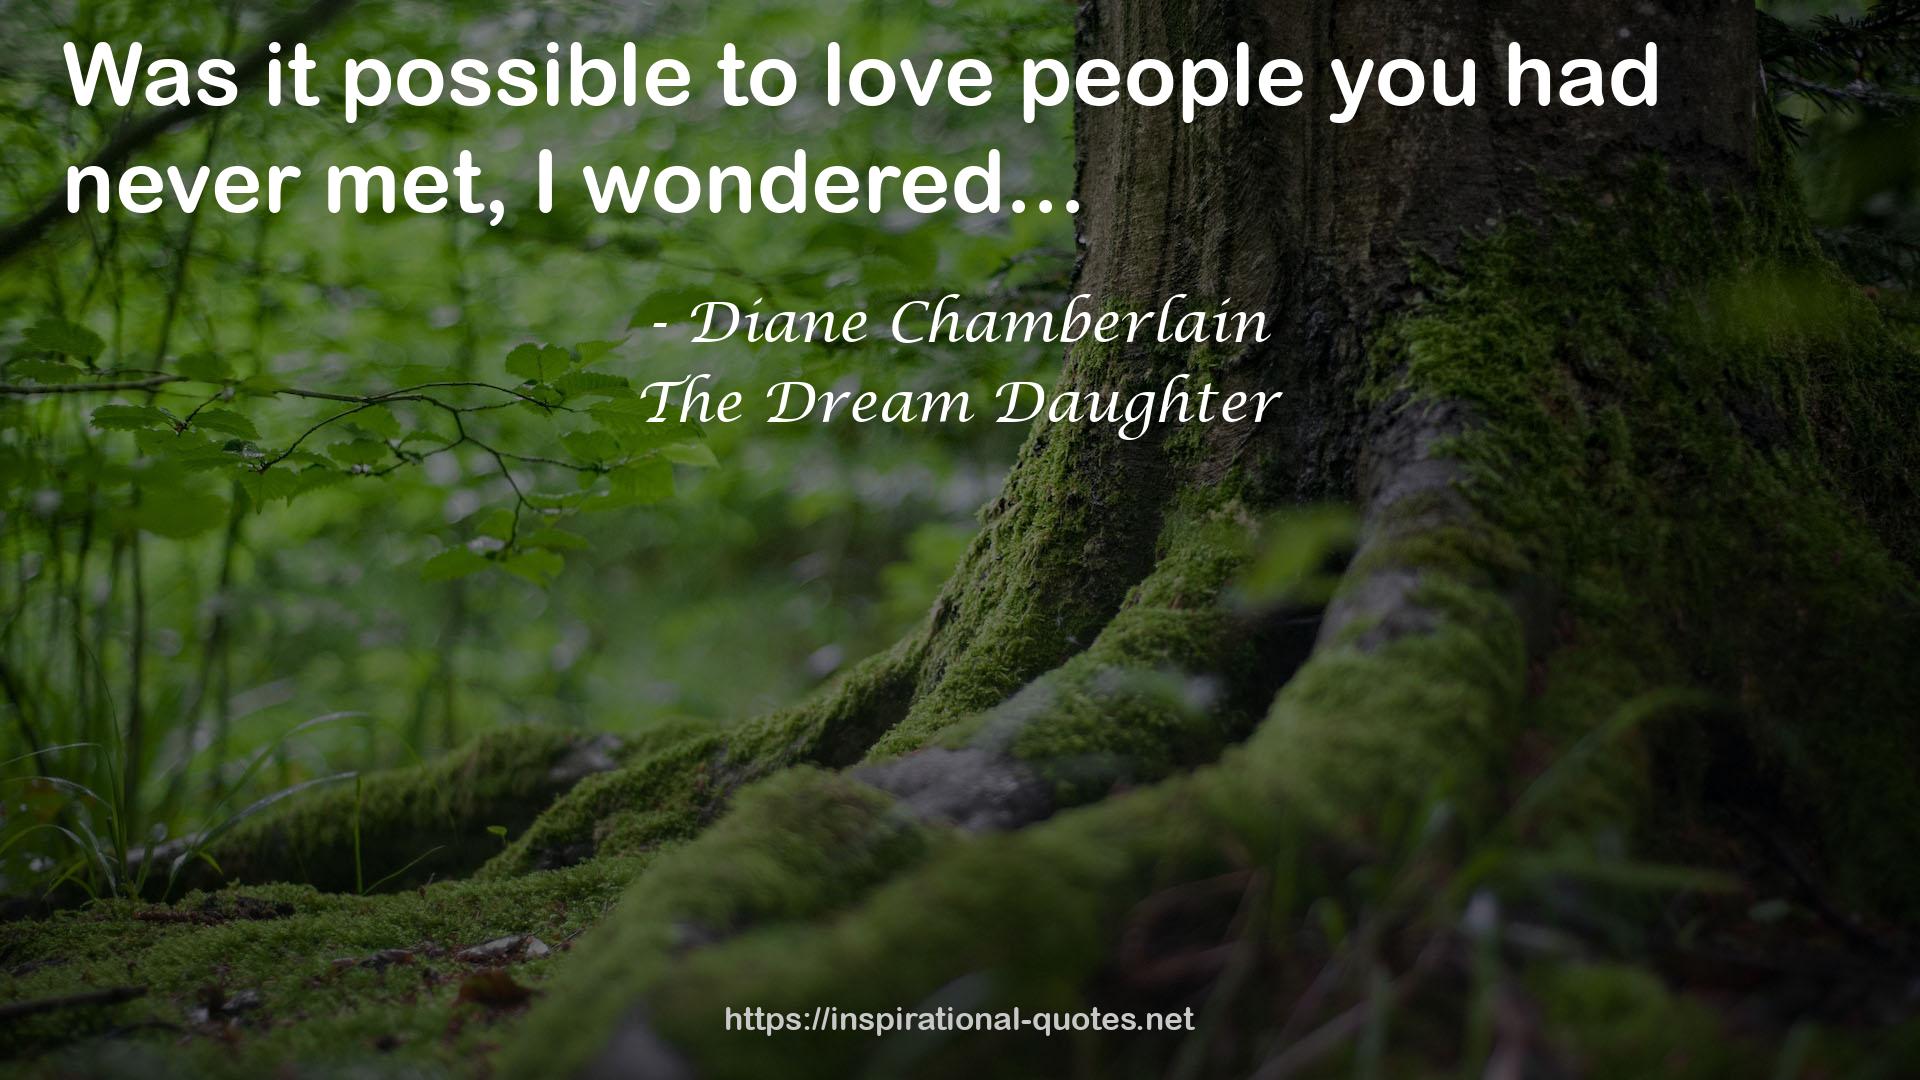 The Dream Daughter QUOTES